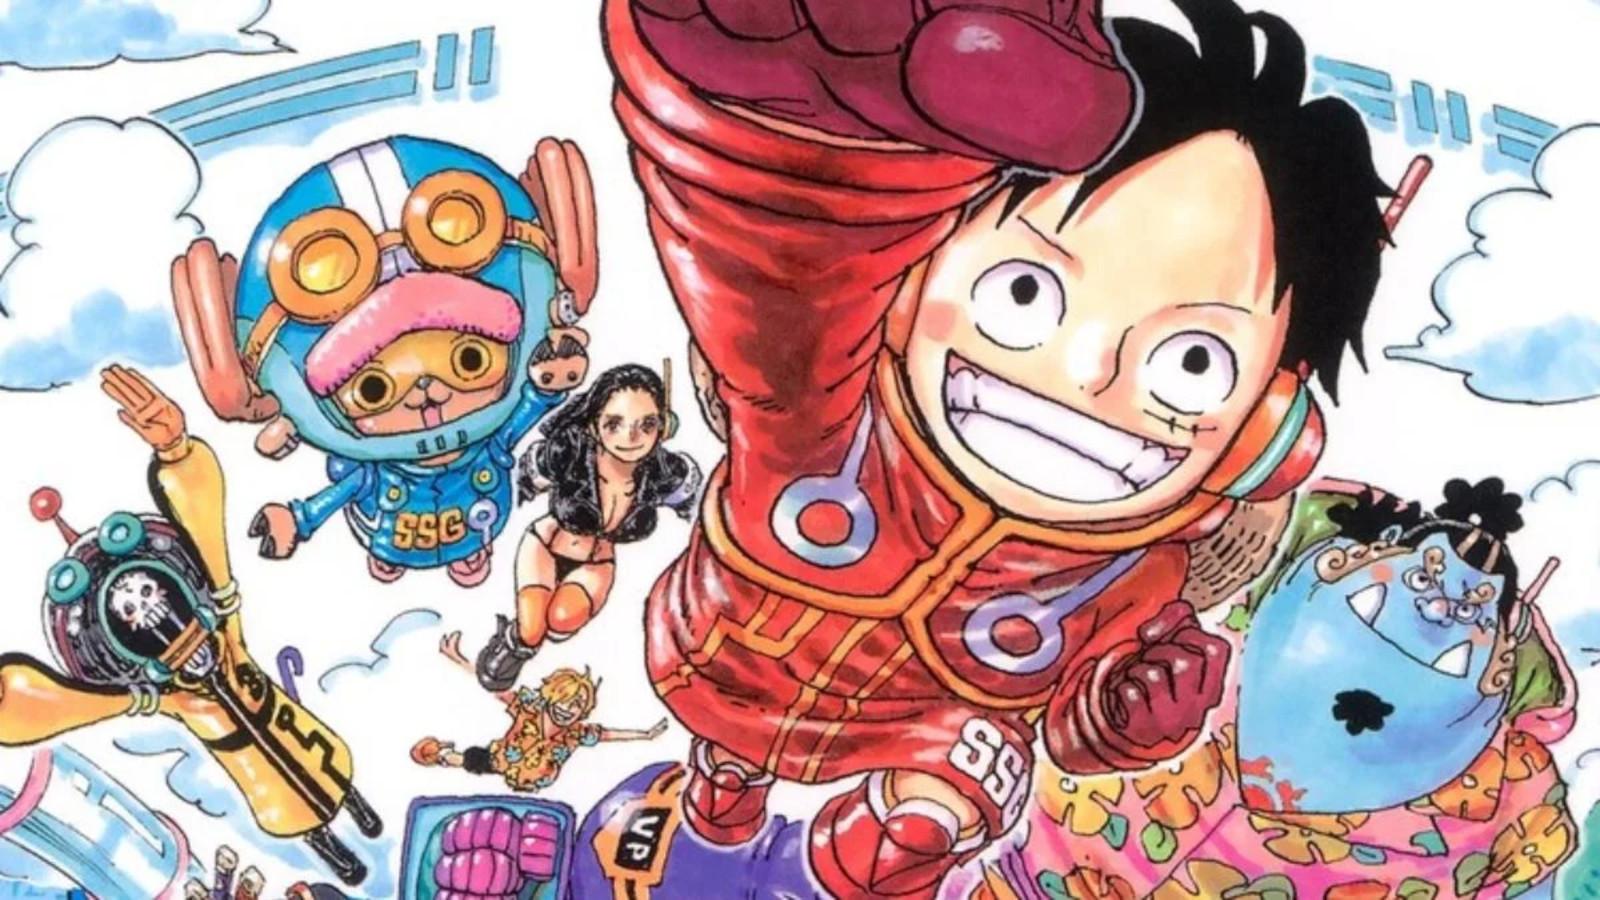 Luffy in the One Piece manga